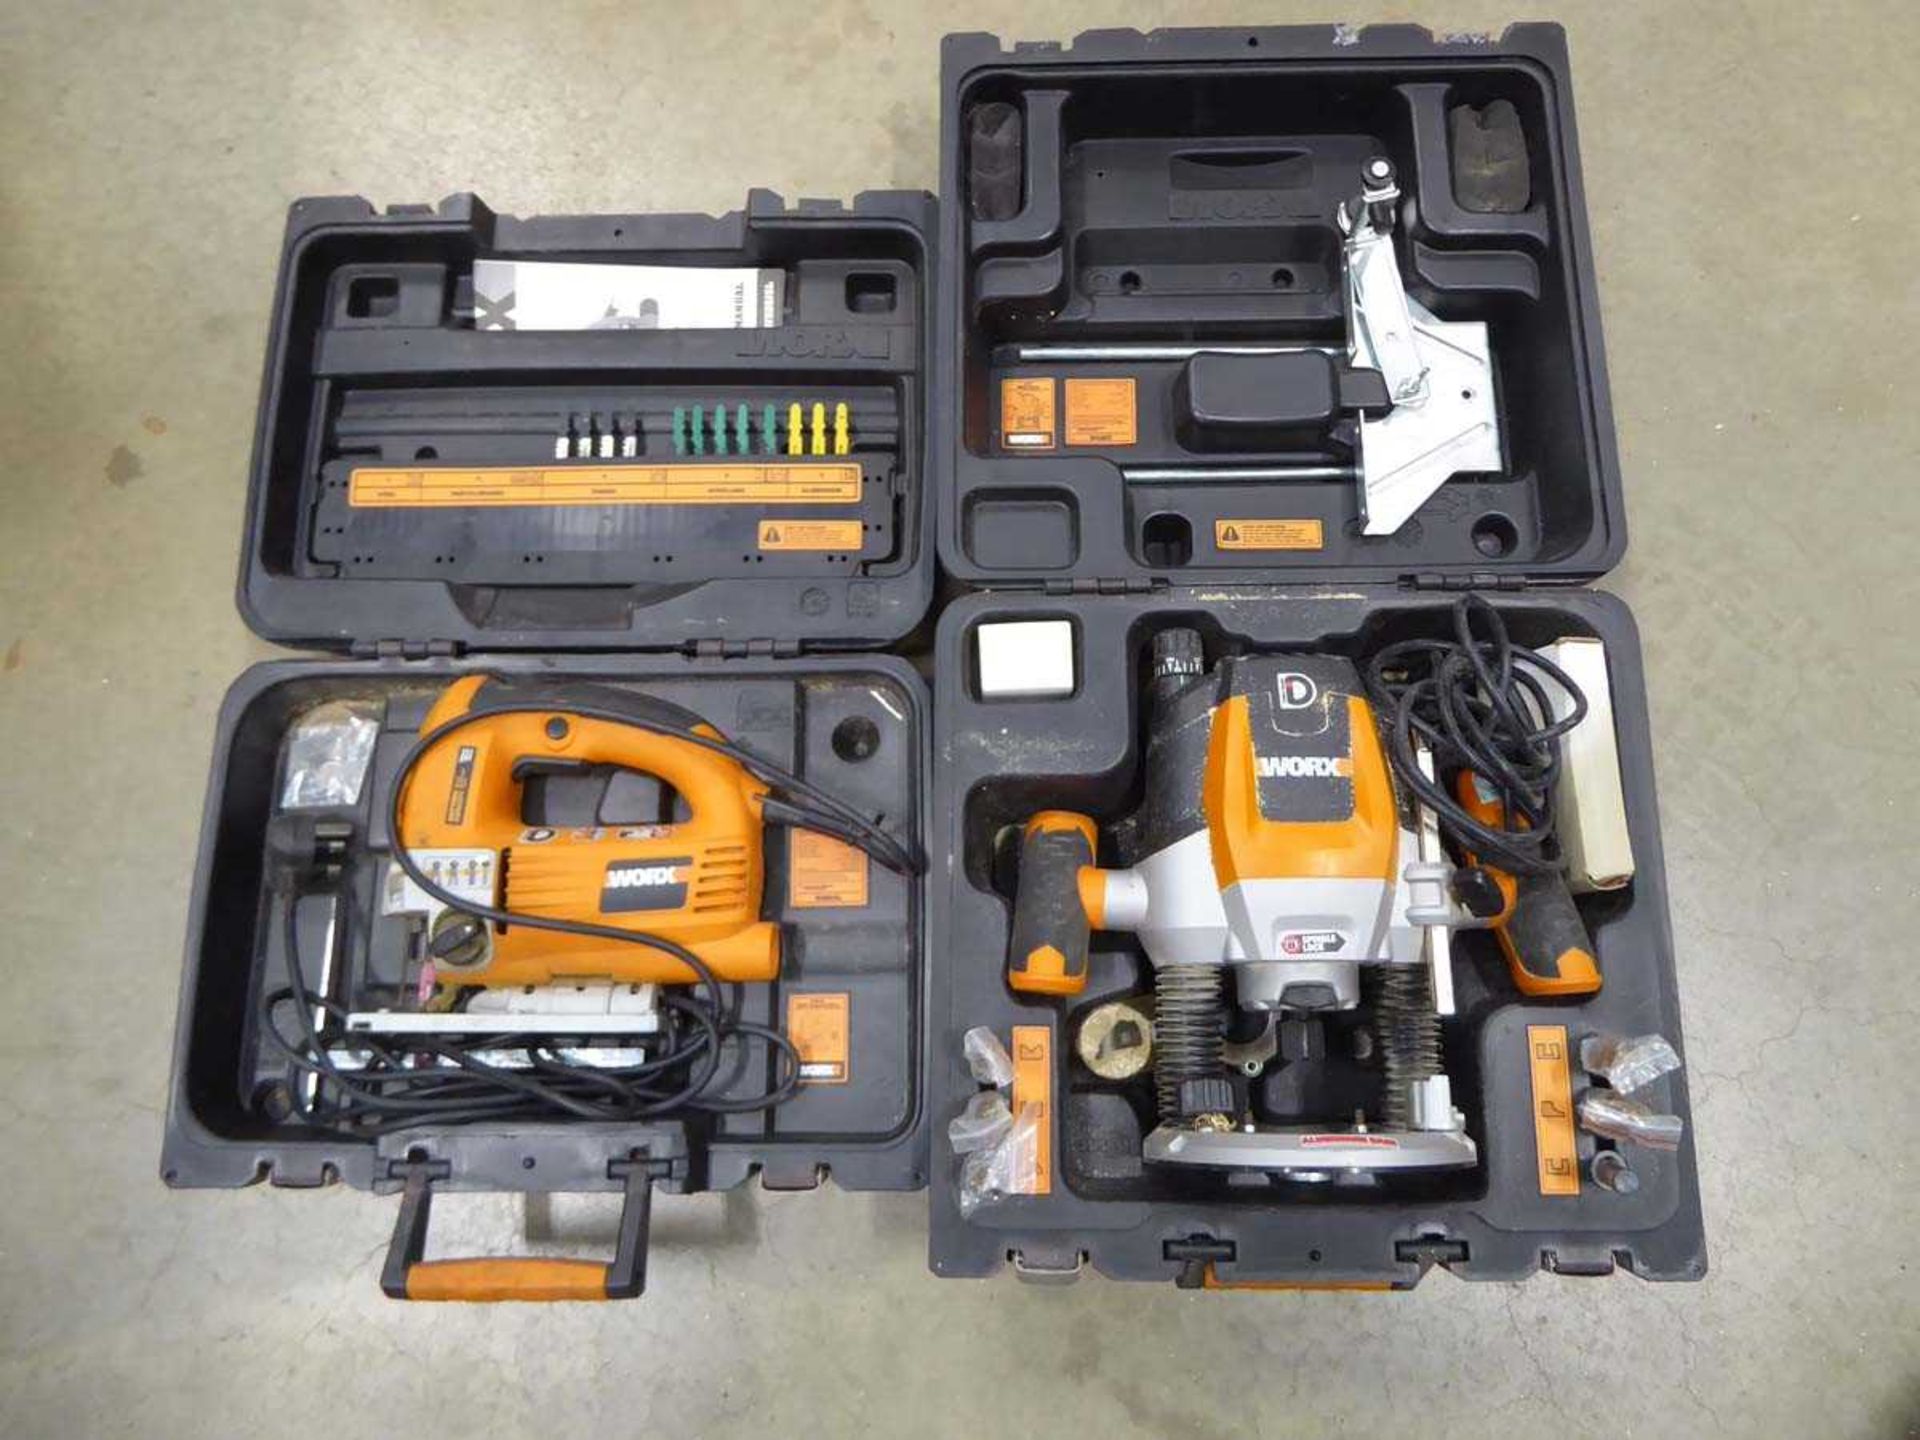 Worx 240v jigsaw and Worx router